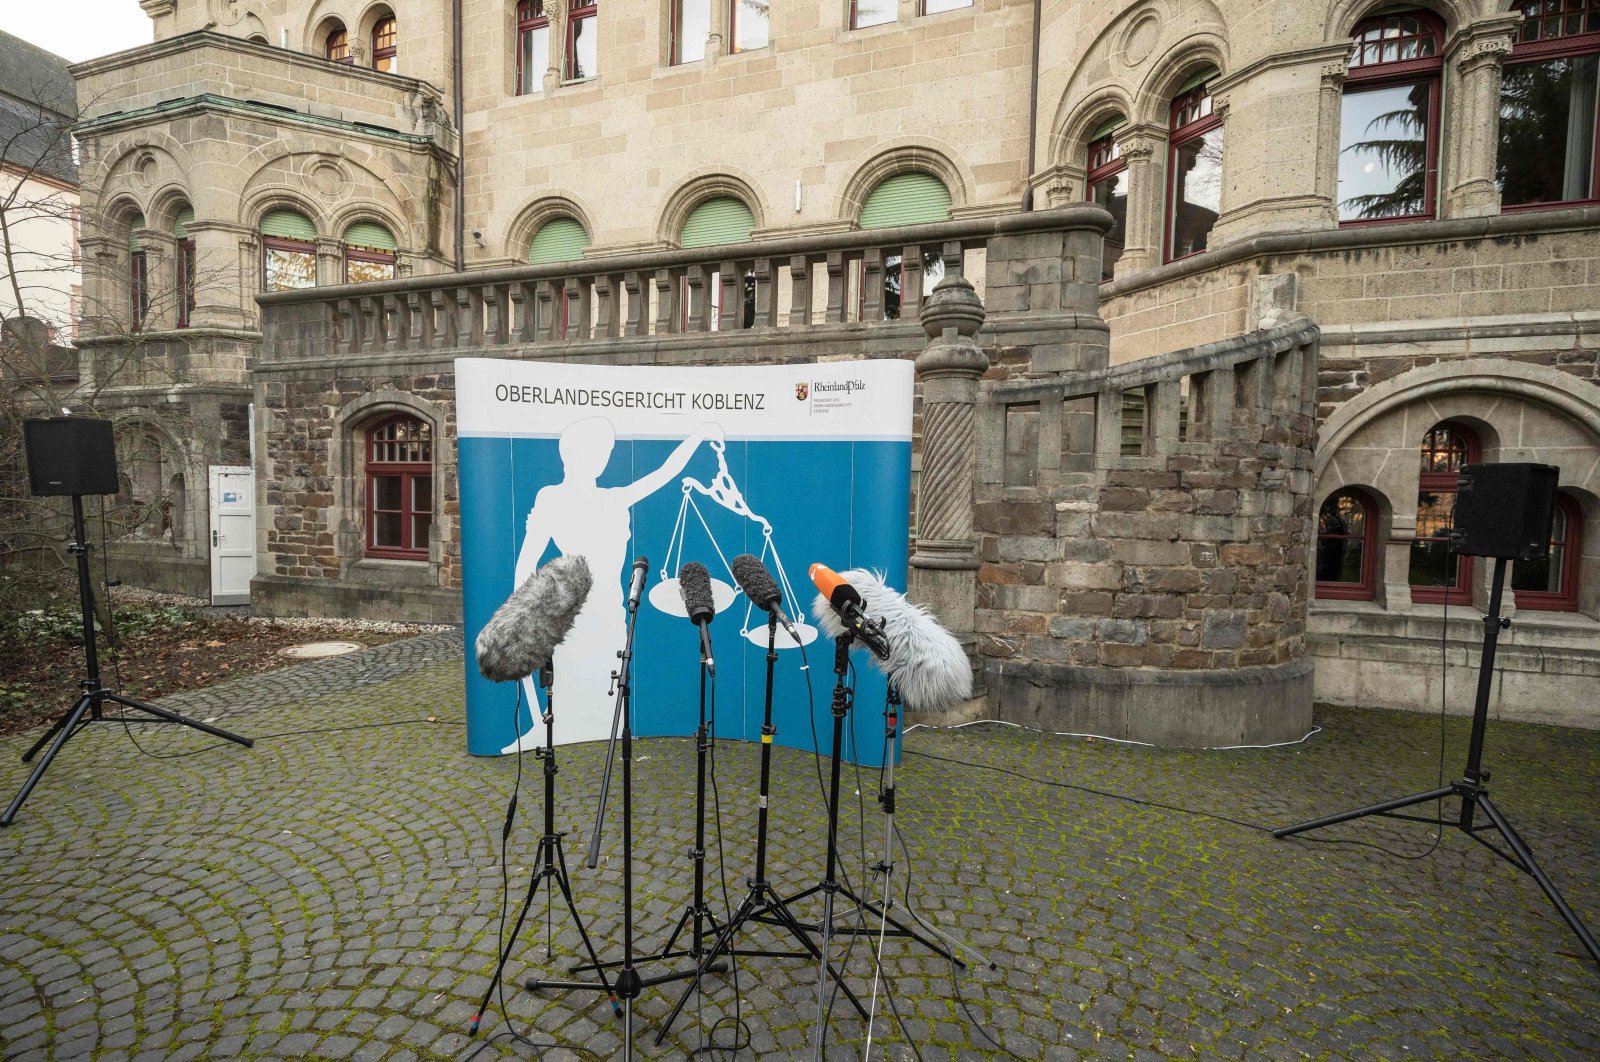 Microphones are set up in front of a banner featuring a &quot;Justitia&quot; ahead of a press conference outside the courthouse in Koblenz, western Germany, Jan. 13, 2022 (AFP Photo)